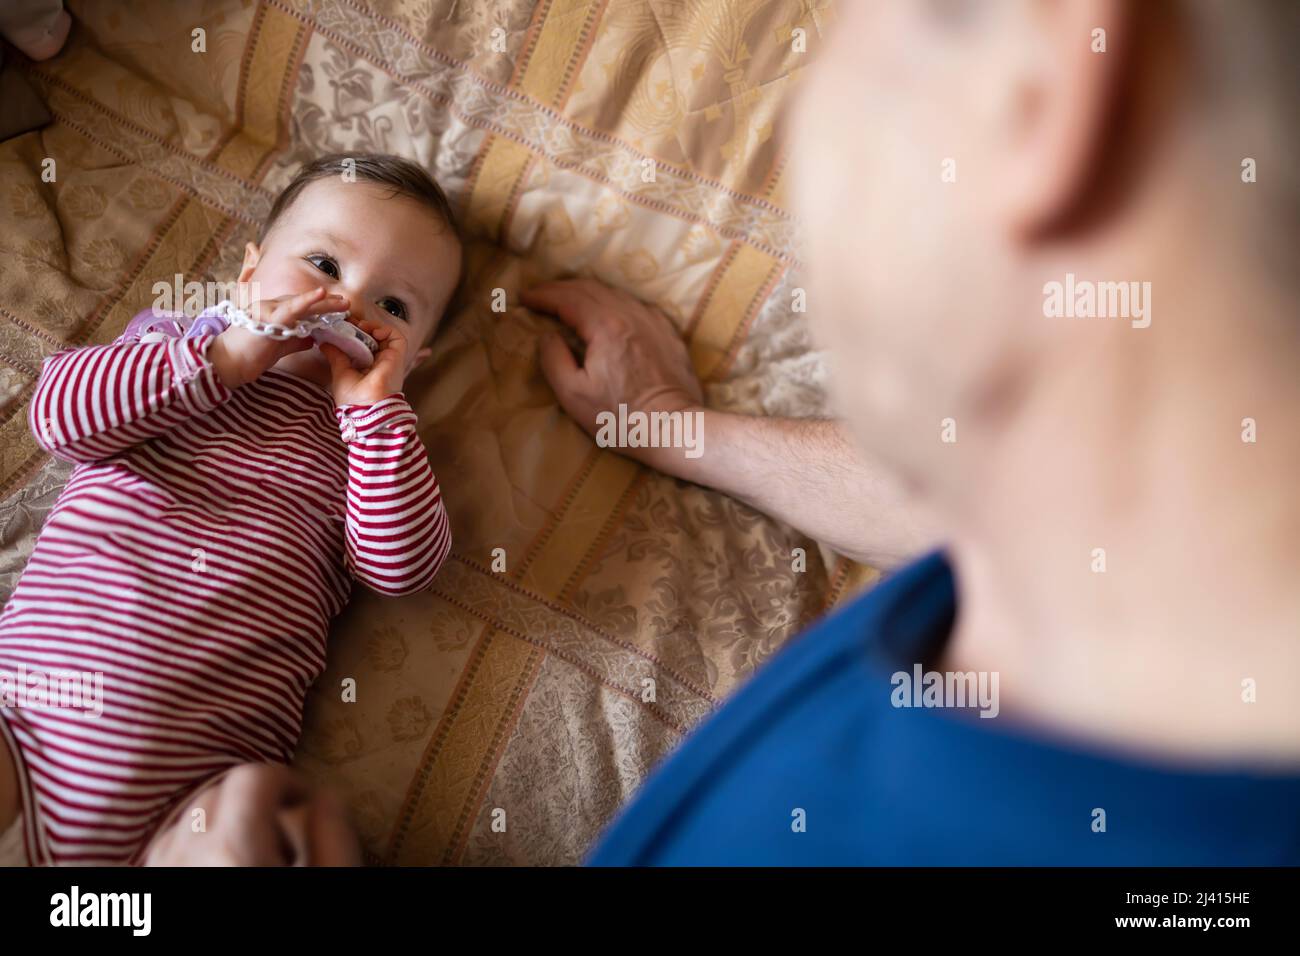 Small baby playing with her grandpa Stock Photo